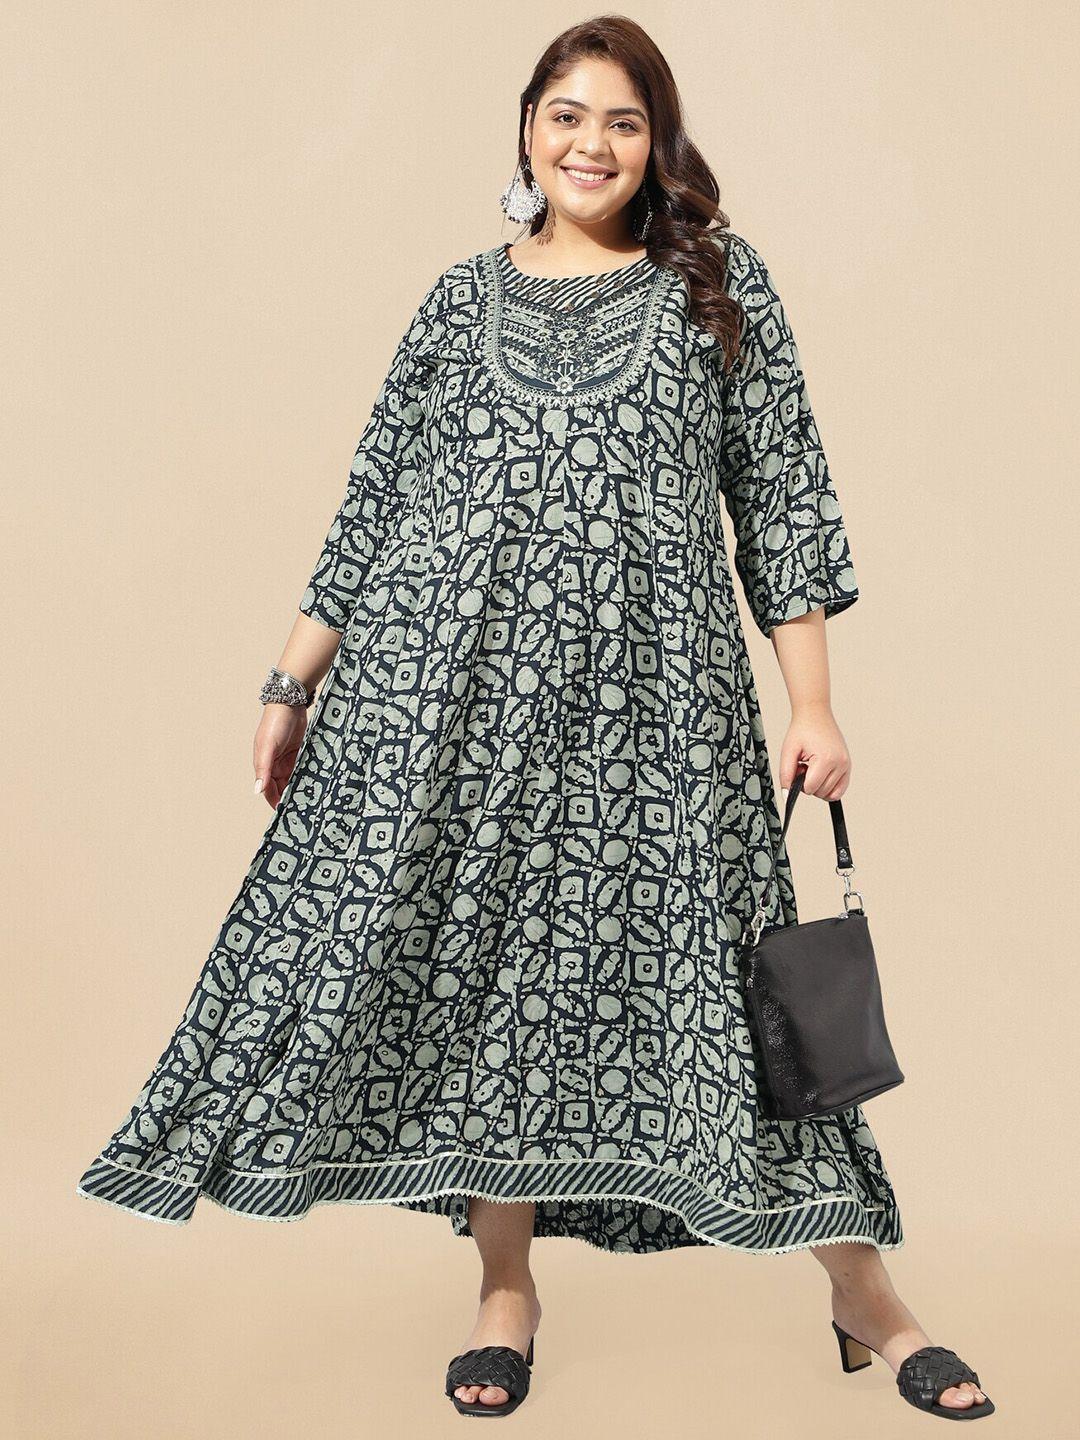 mirchi-fashion-navy-blue-plus-size-abstract-printed-embellished-empire-ethnic-dress